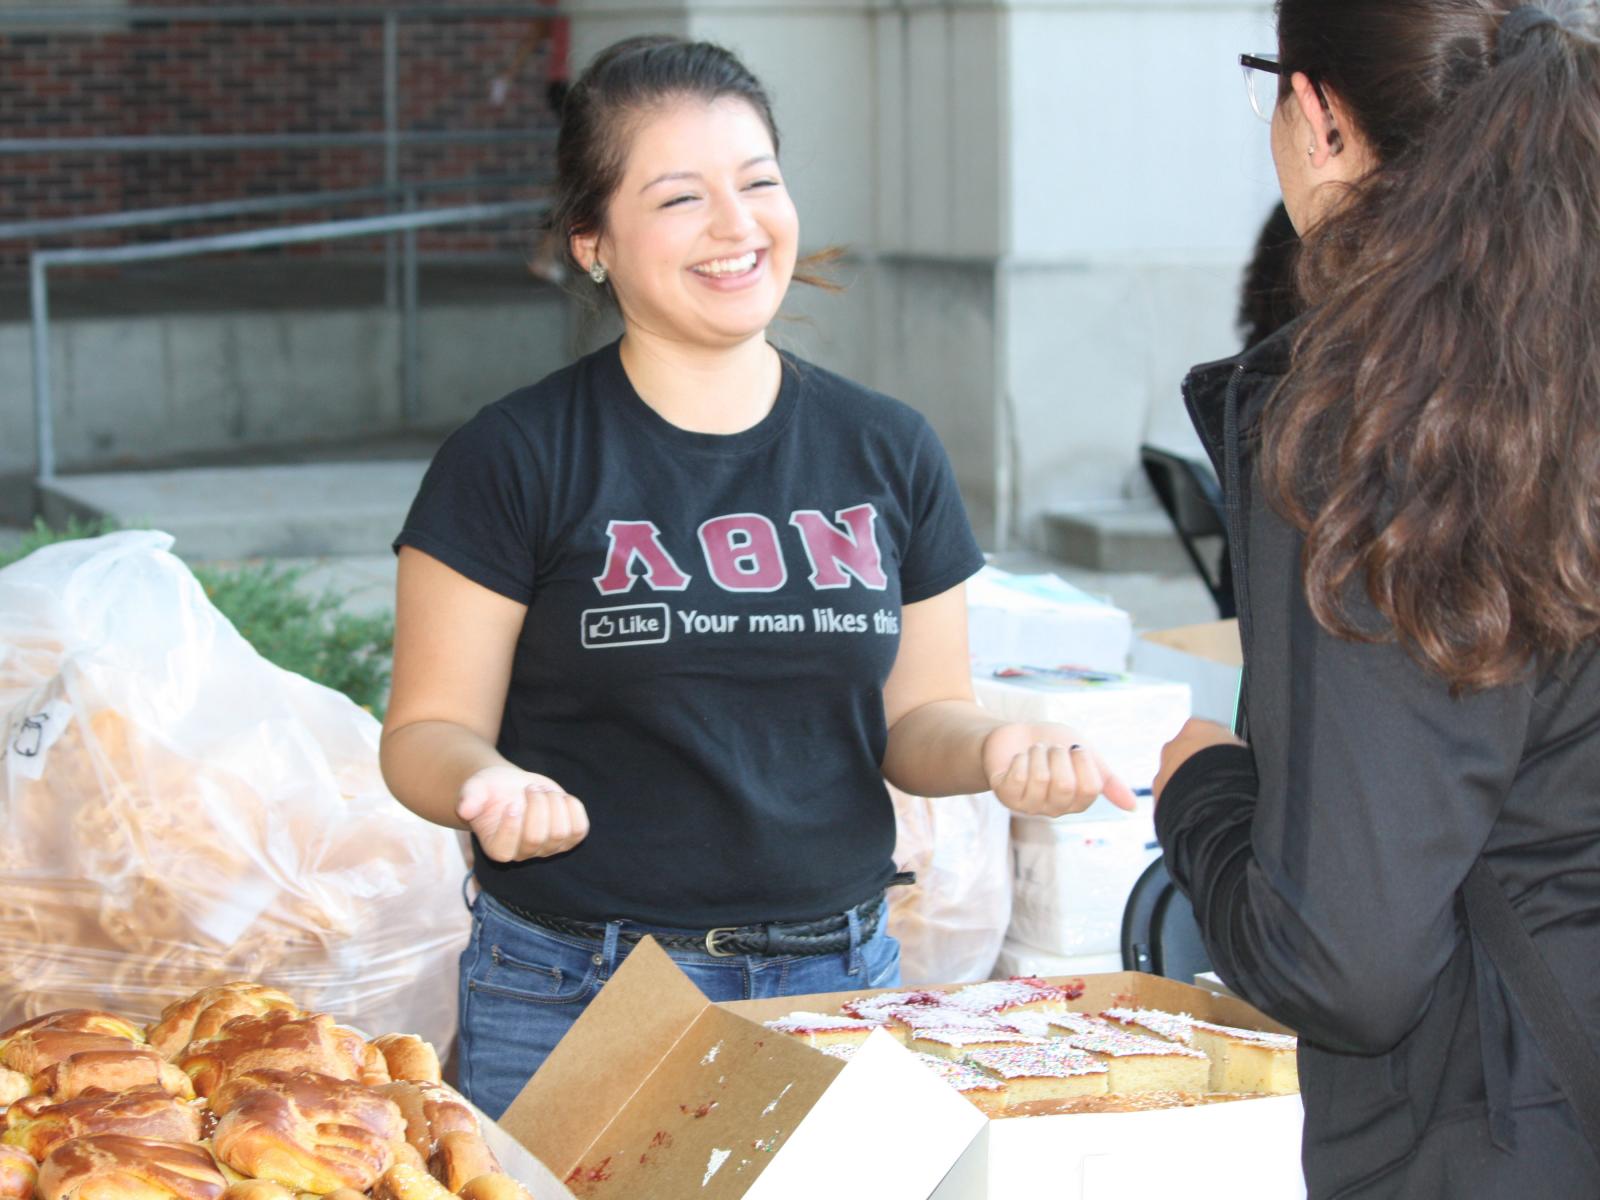 Students celebrate Hispanic heritage with new snacks at Fiesta on the Green at the University of Nebraska-Lincoln.